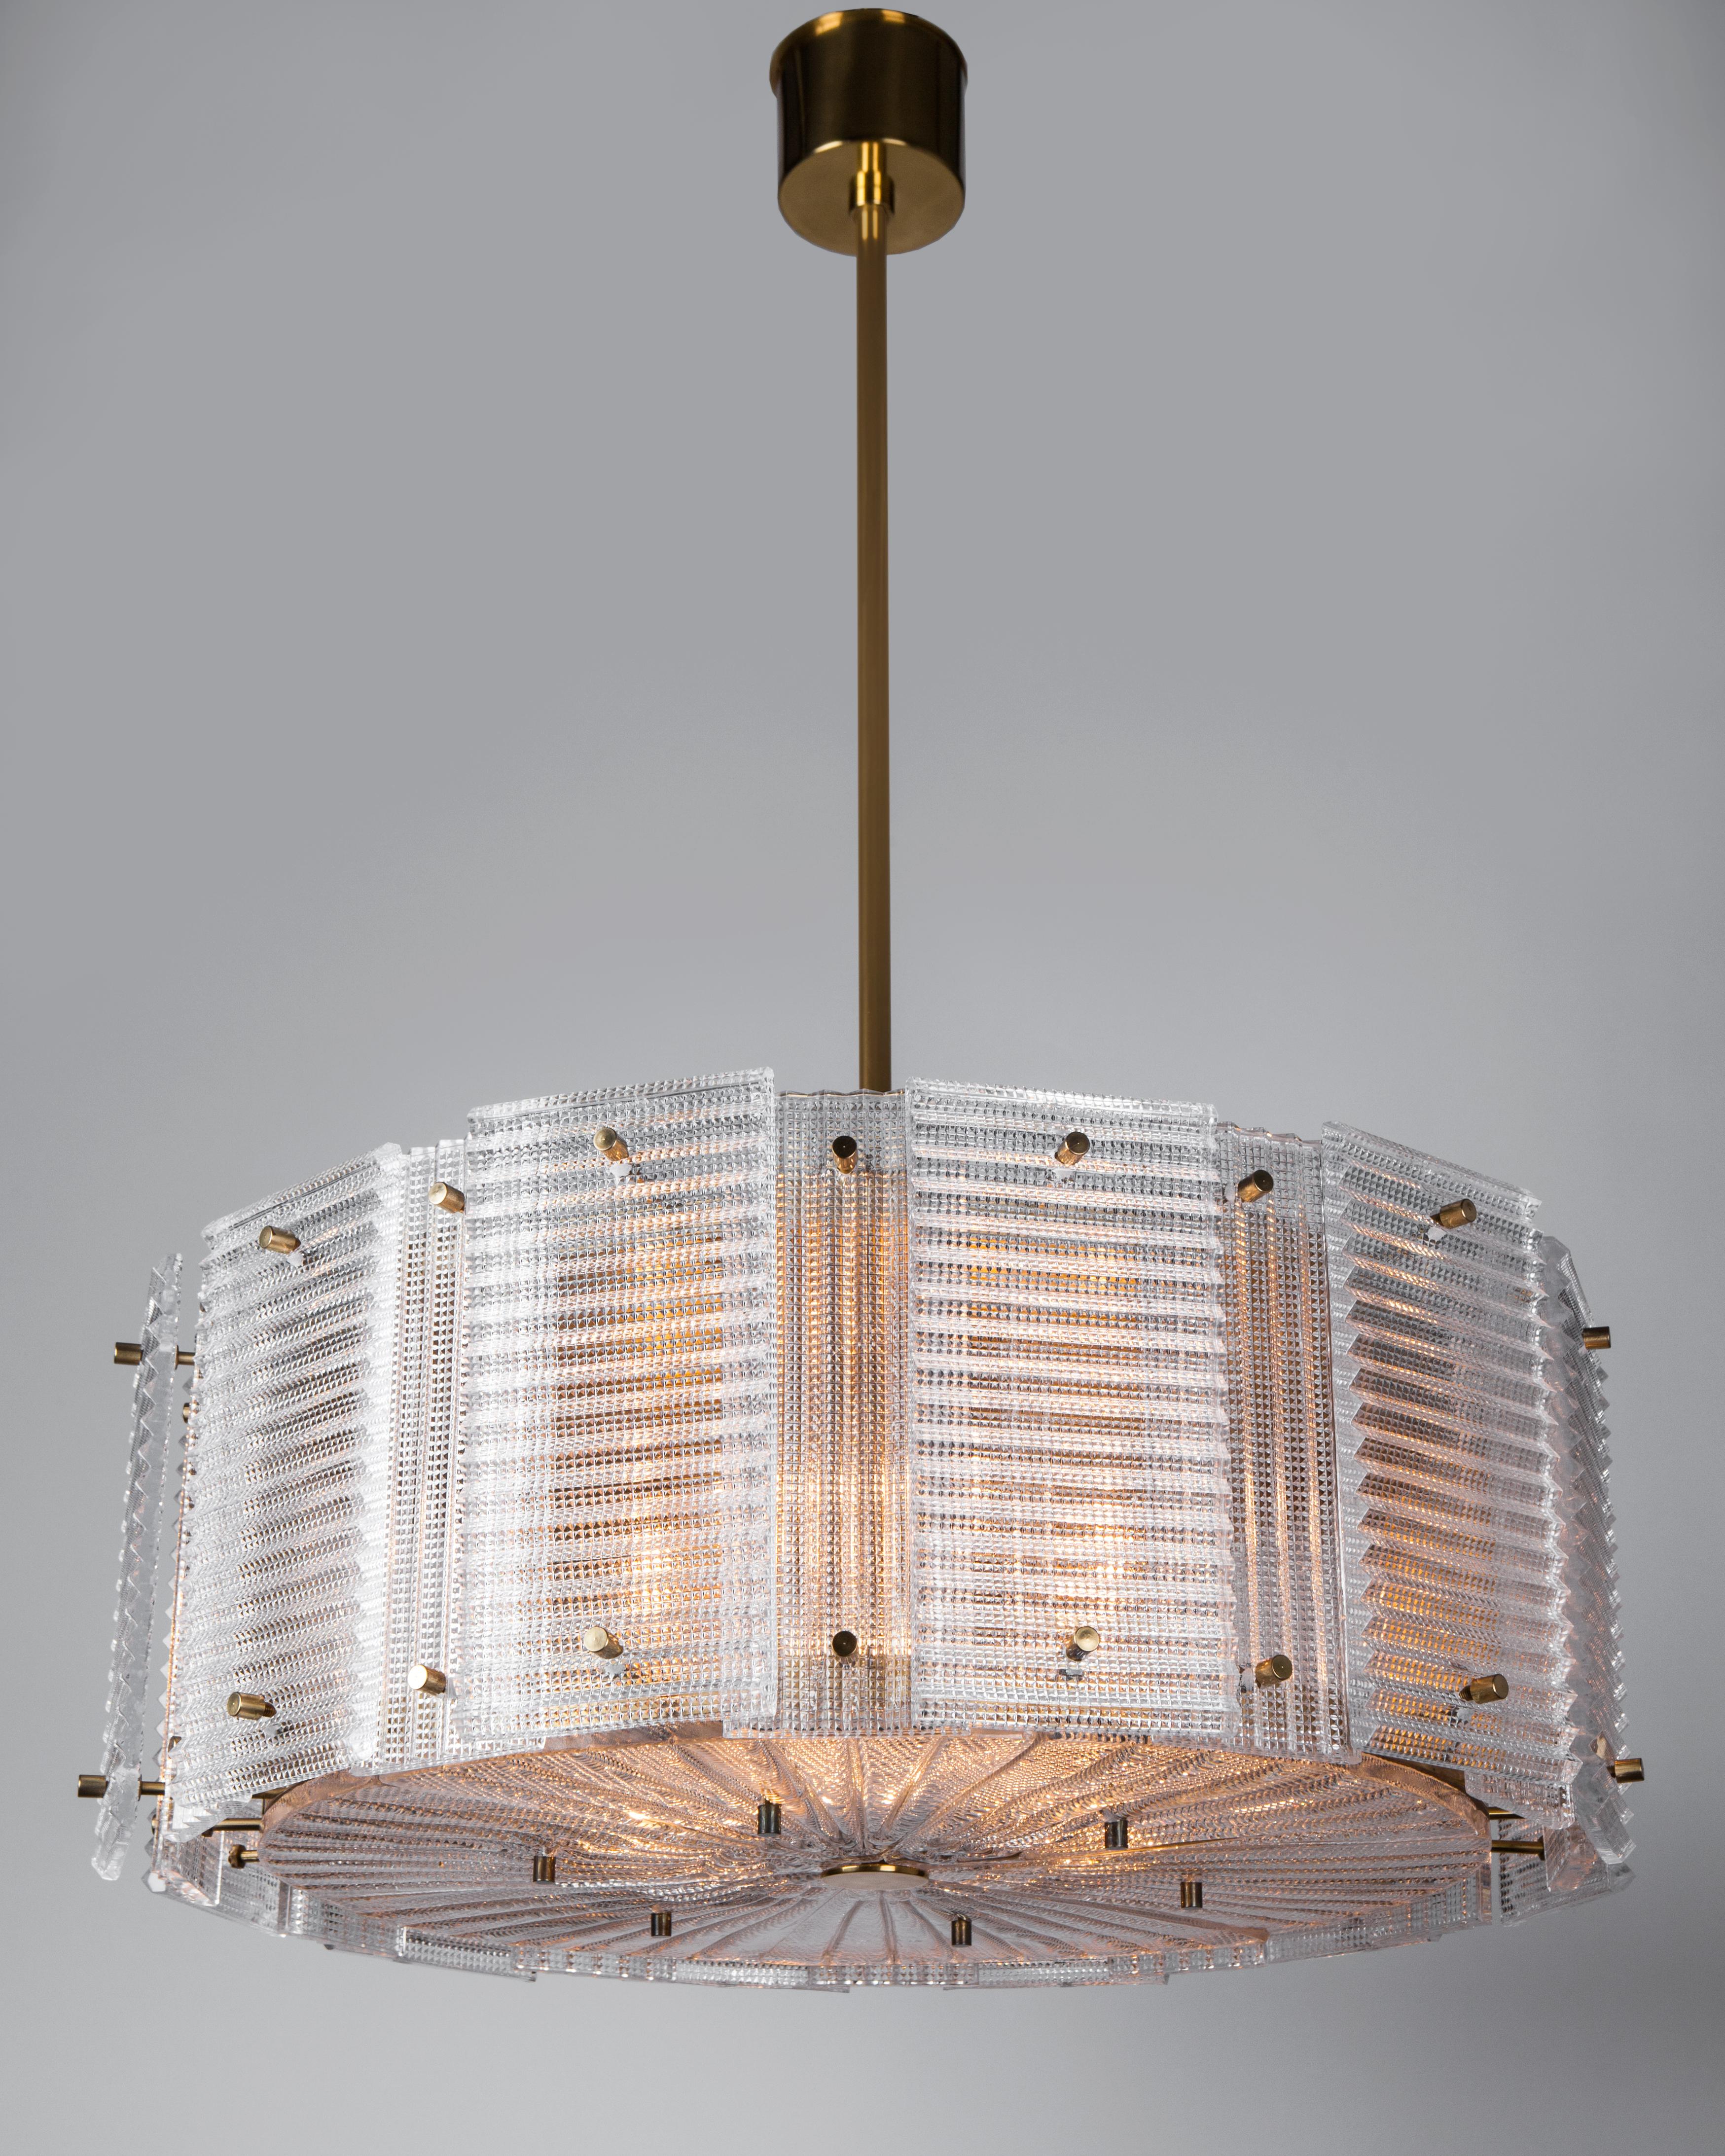 AHL4020

A large drum pendant with staggered textured glass panels on an aged lacquered brass frame. Attributed to the Swedish glassmaker Orrefors. Due to the antique nature of this fixture, there may be some nicks or imperfections in the